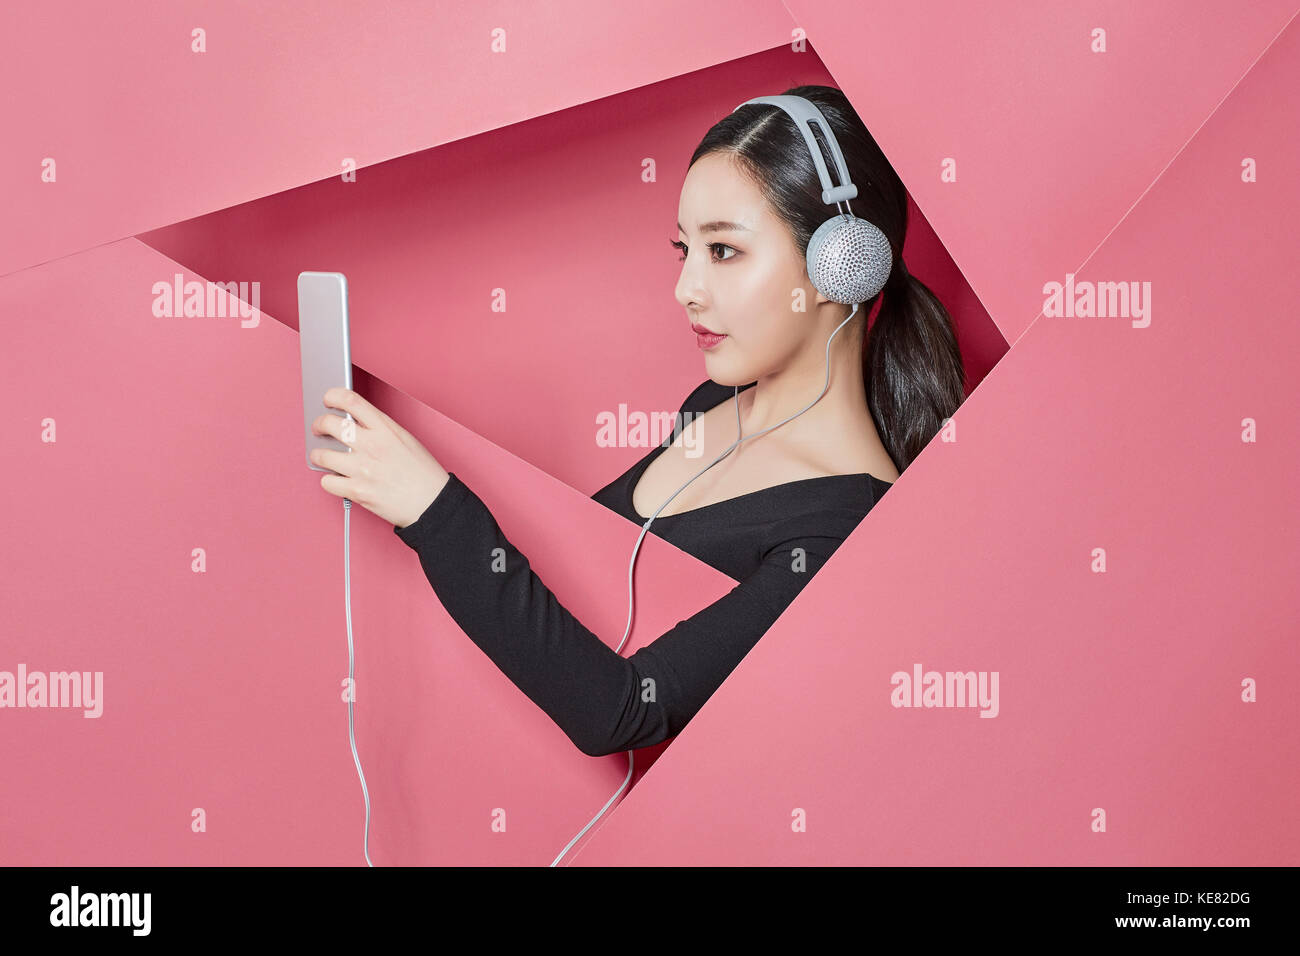 Side view portrait of young woman listening to music on smartphone Banque D'Images